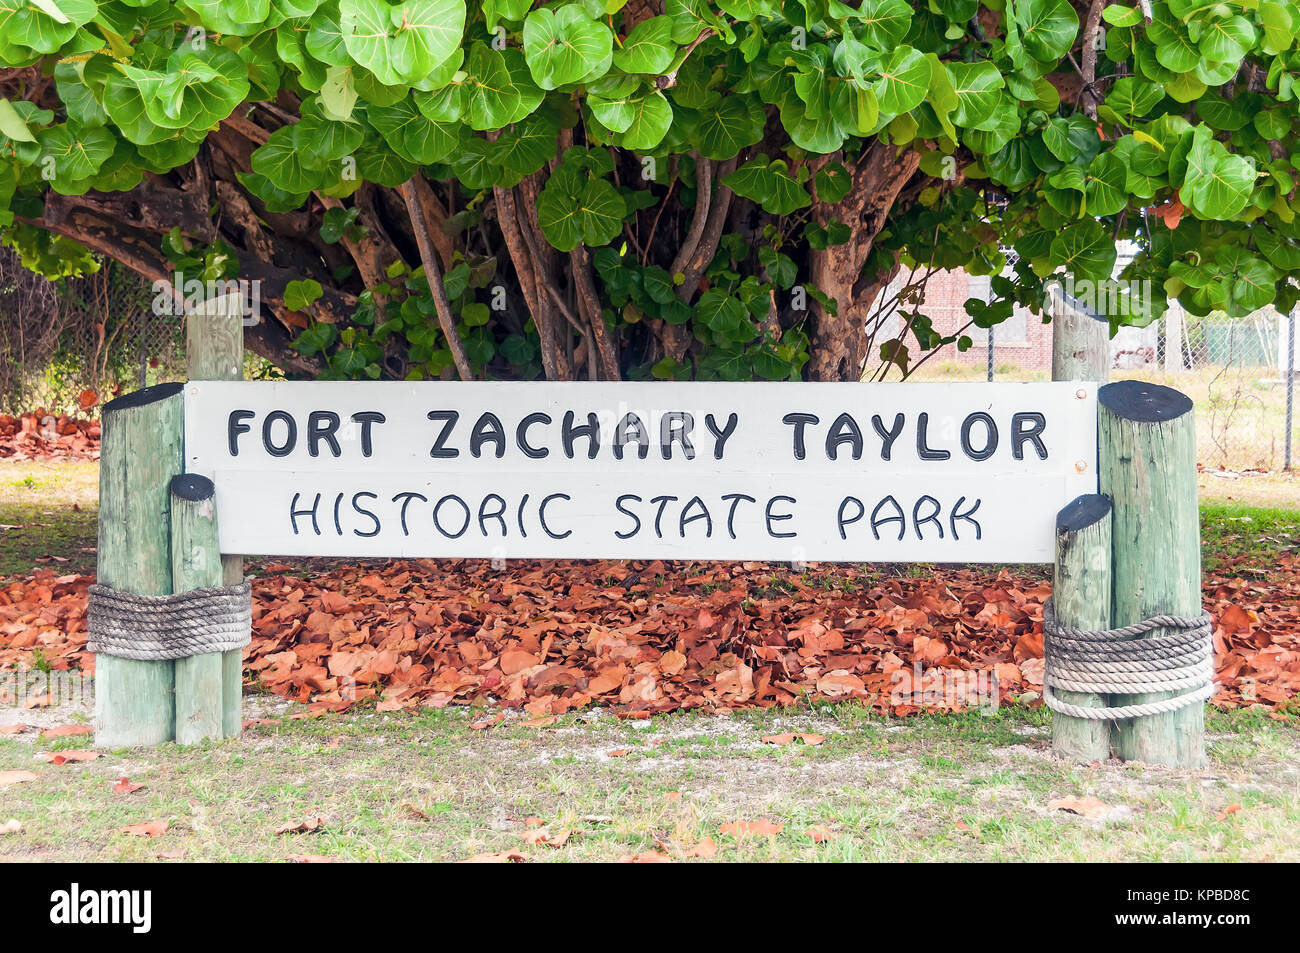 Fort Zachary Taylor Historic State Park sign benath seagrape tree, Key West, Floride Banque D'Images